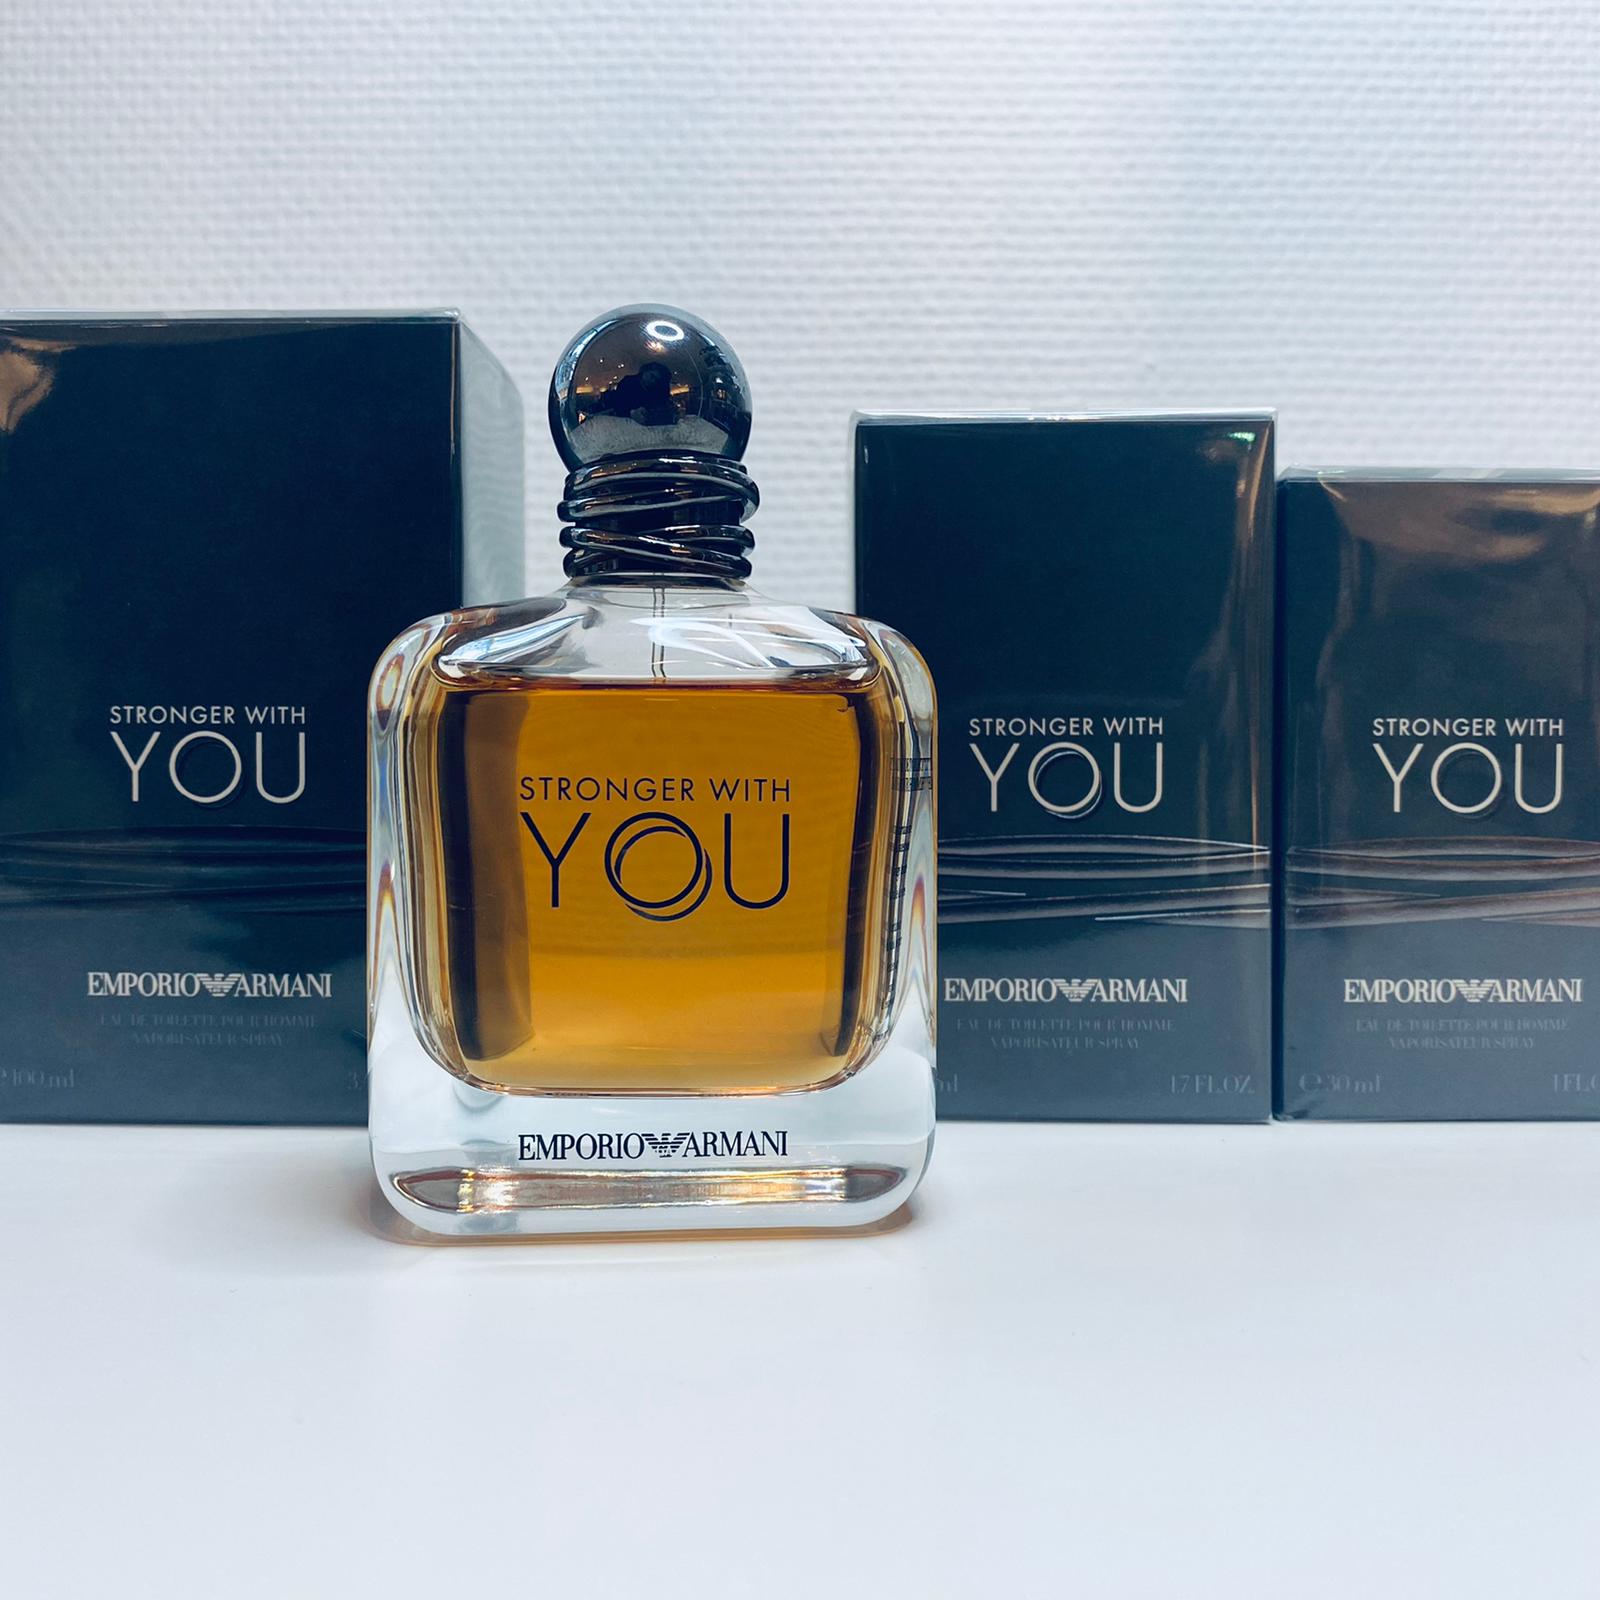 Emporio Armani Stronger with you EDT 50 ml